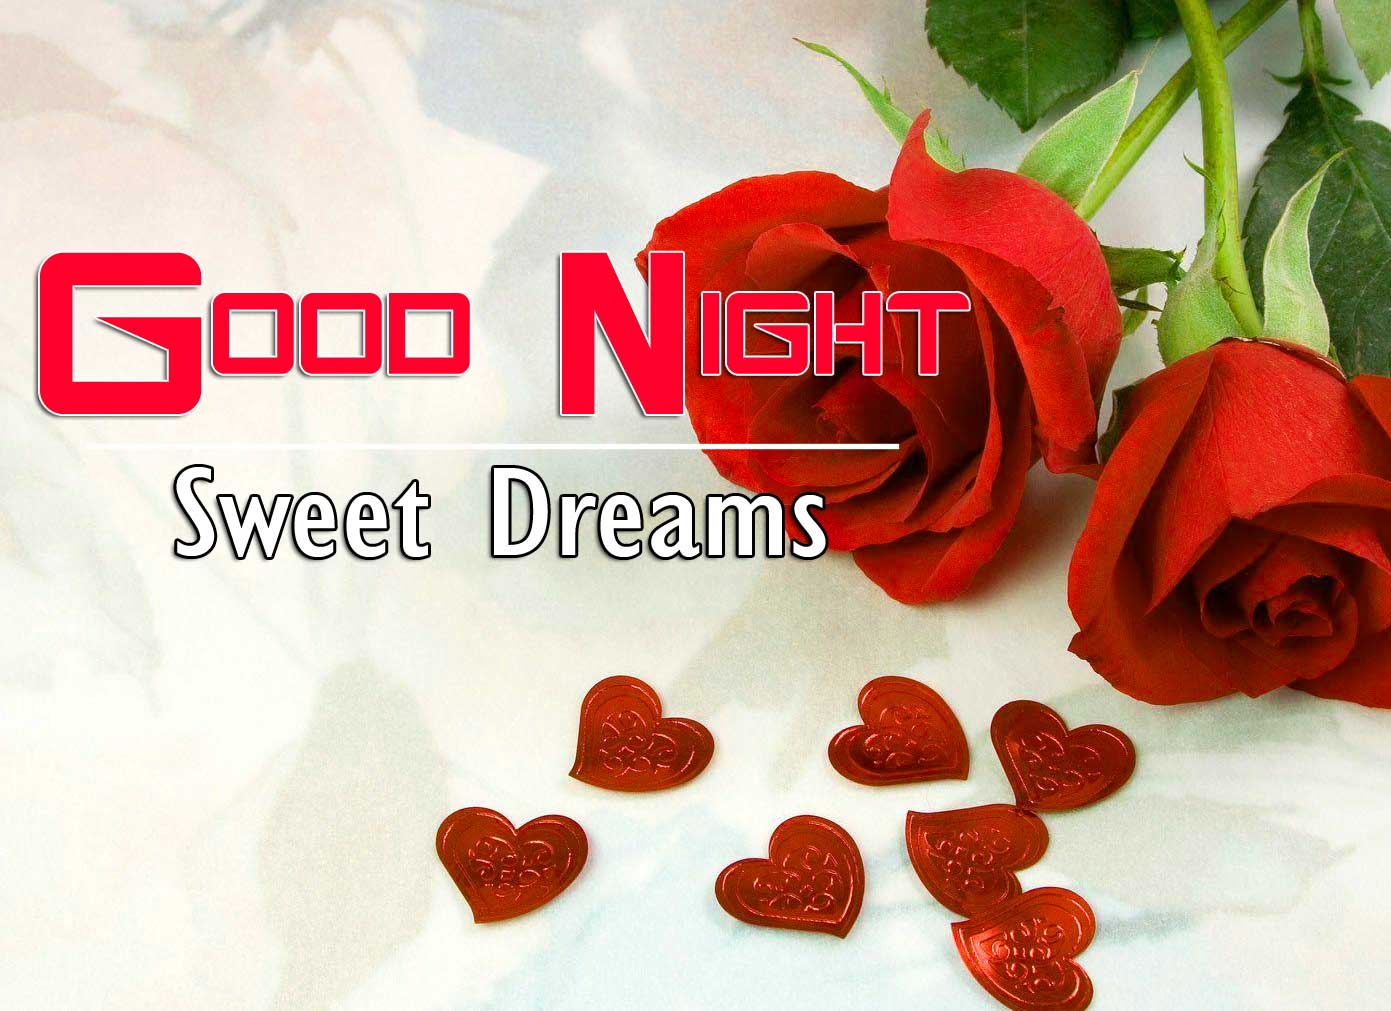 Good Night Images Wallpaper With Red Rose